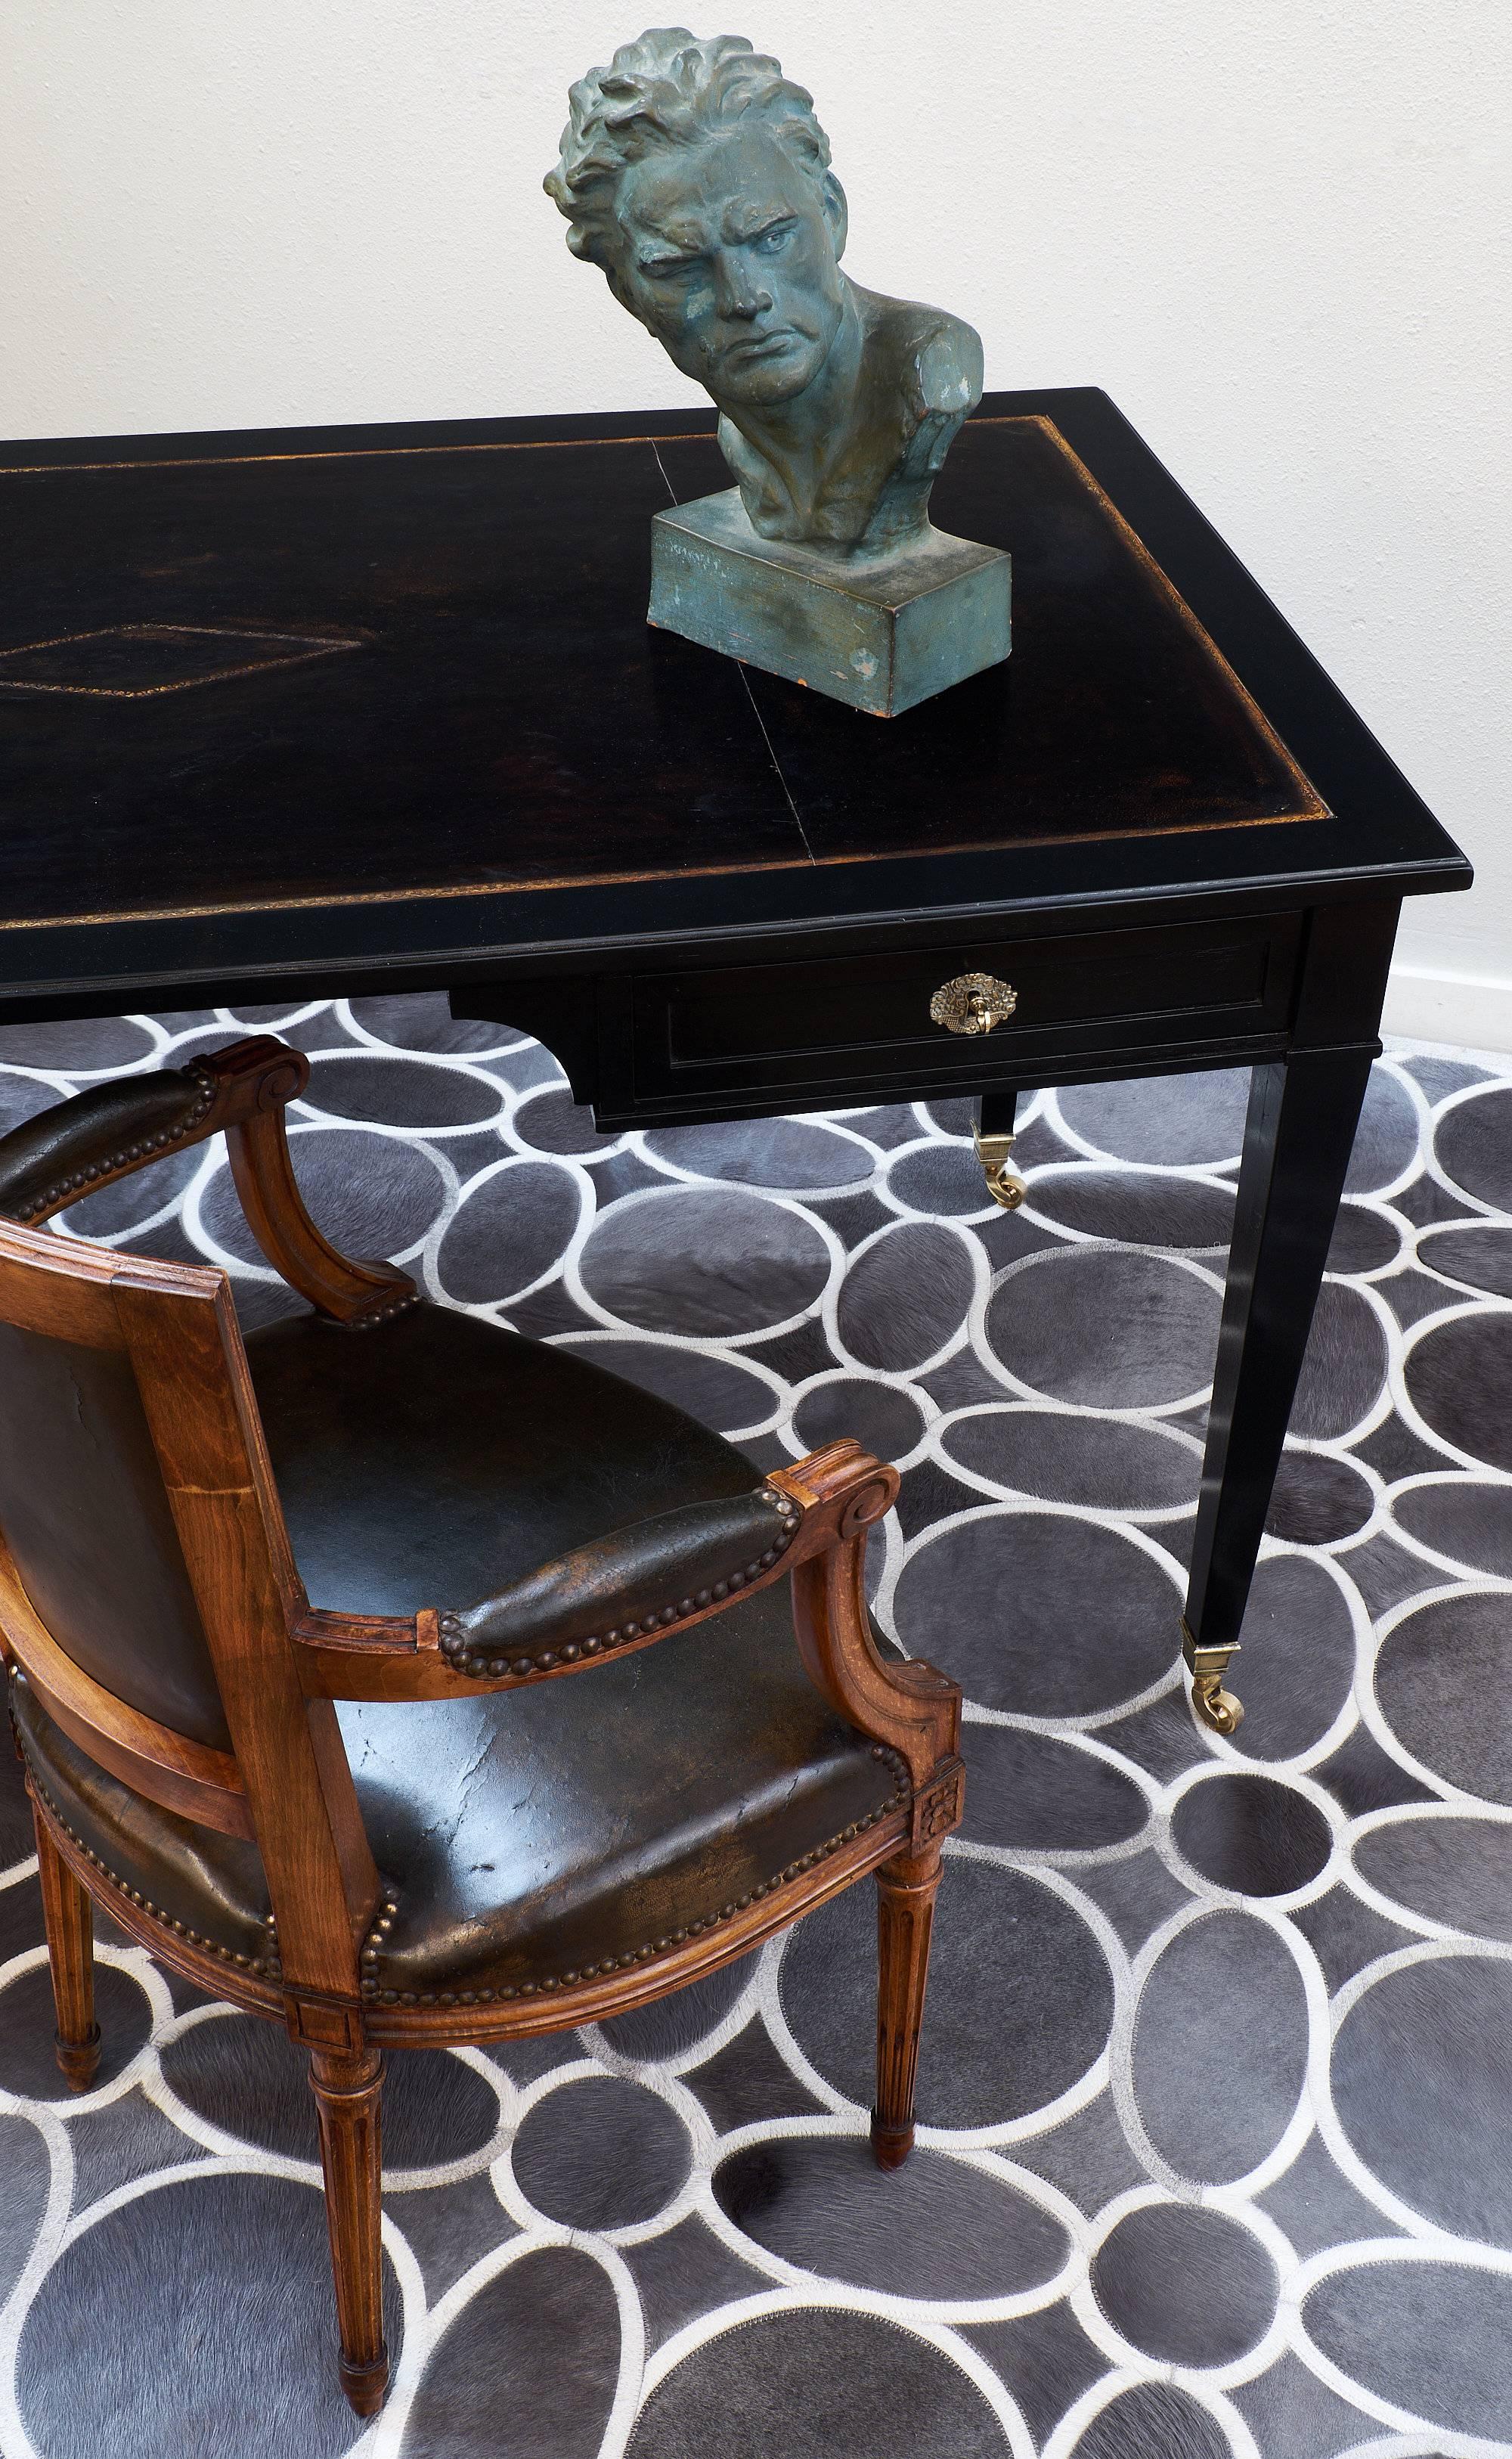 Elegant Directoire style desk from France made of ebonized mahogany that has been finished with a museum quality French polish for high luster. This desk has perfect proportions and features an espresso colored leather writing surface across the